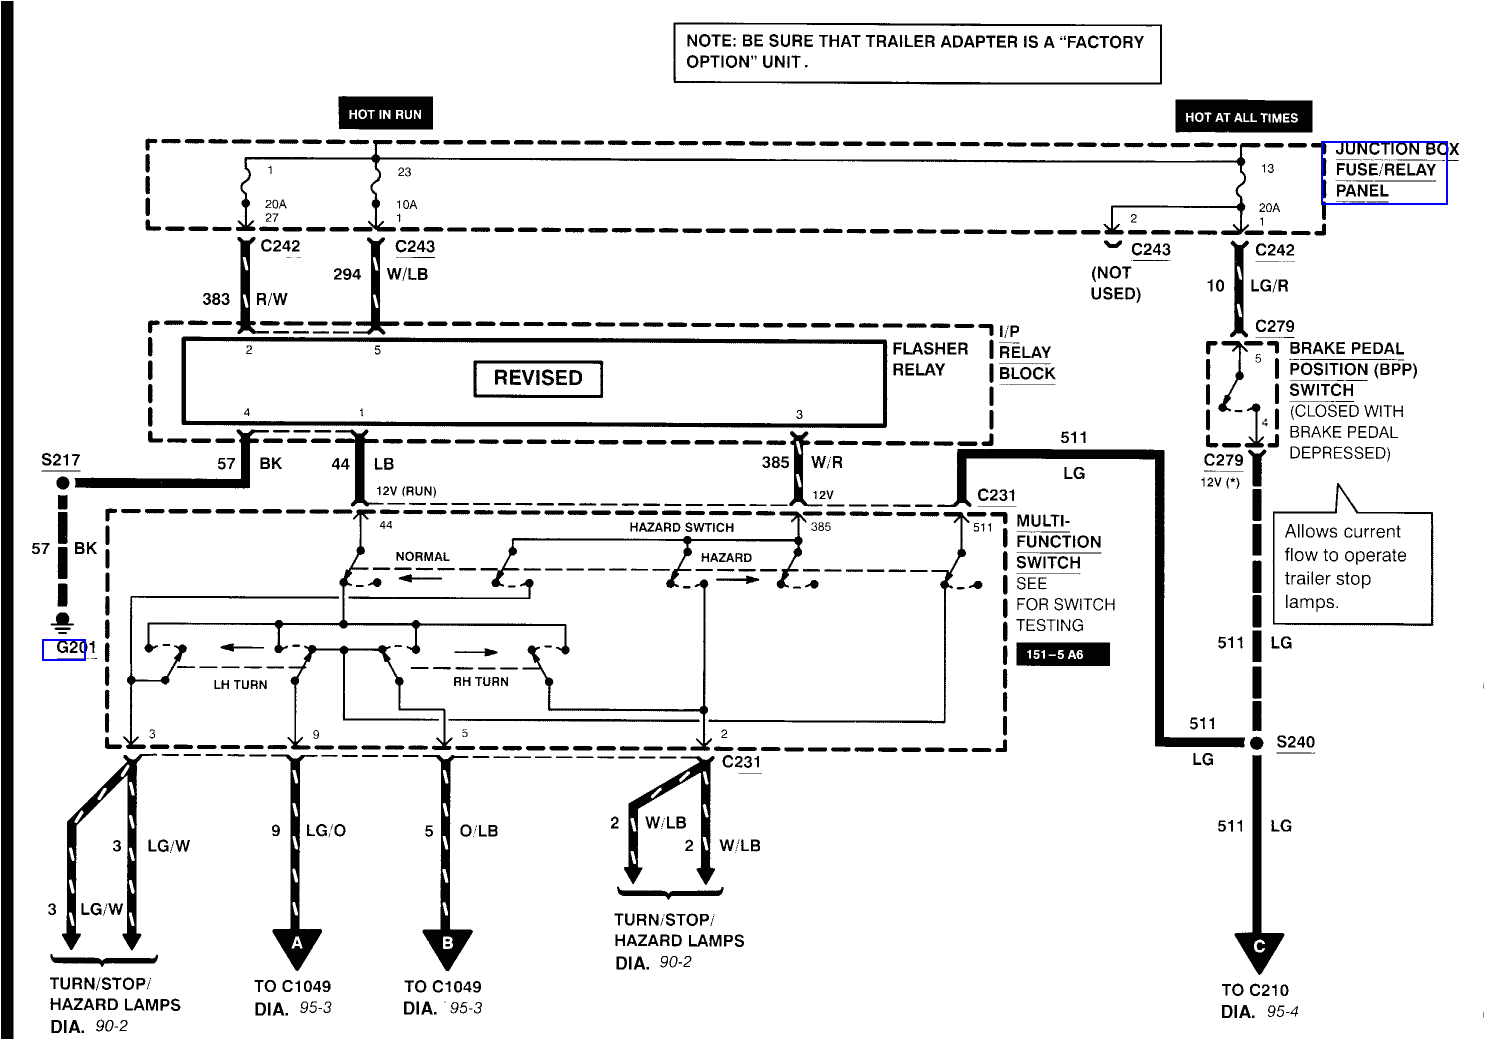 2003 ford f 250 wiring schematic wiring diagrams for 2003 f 250 wiring schematic